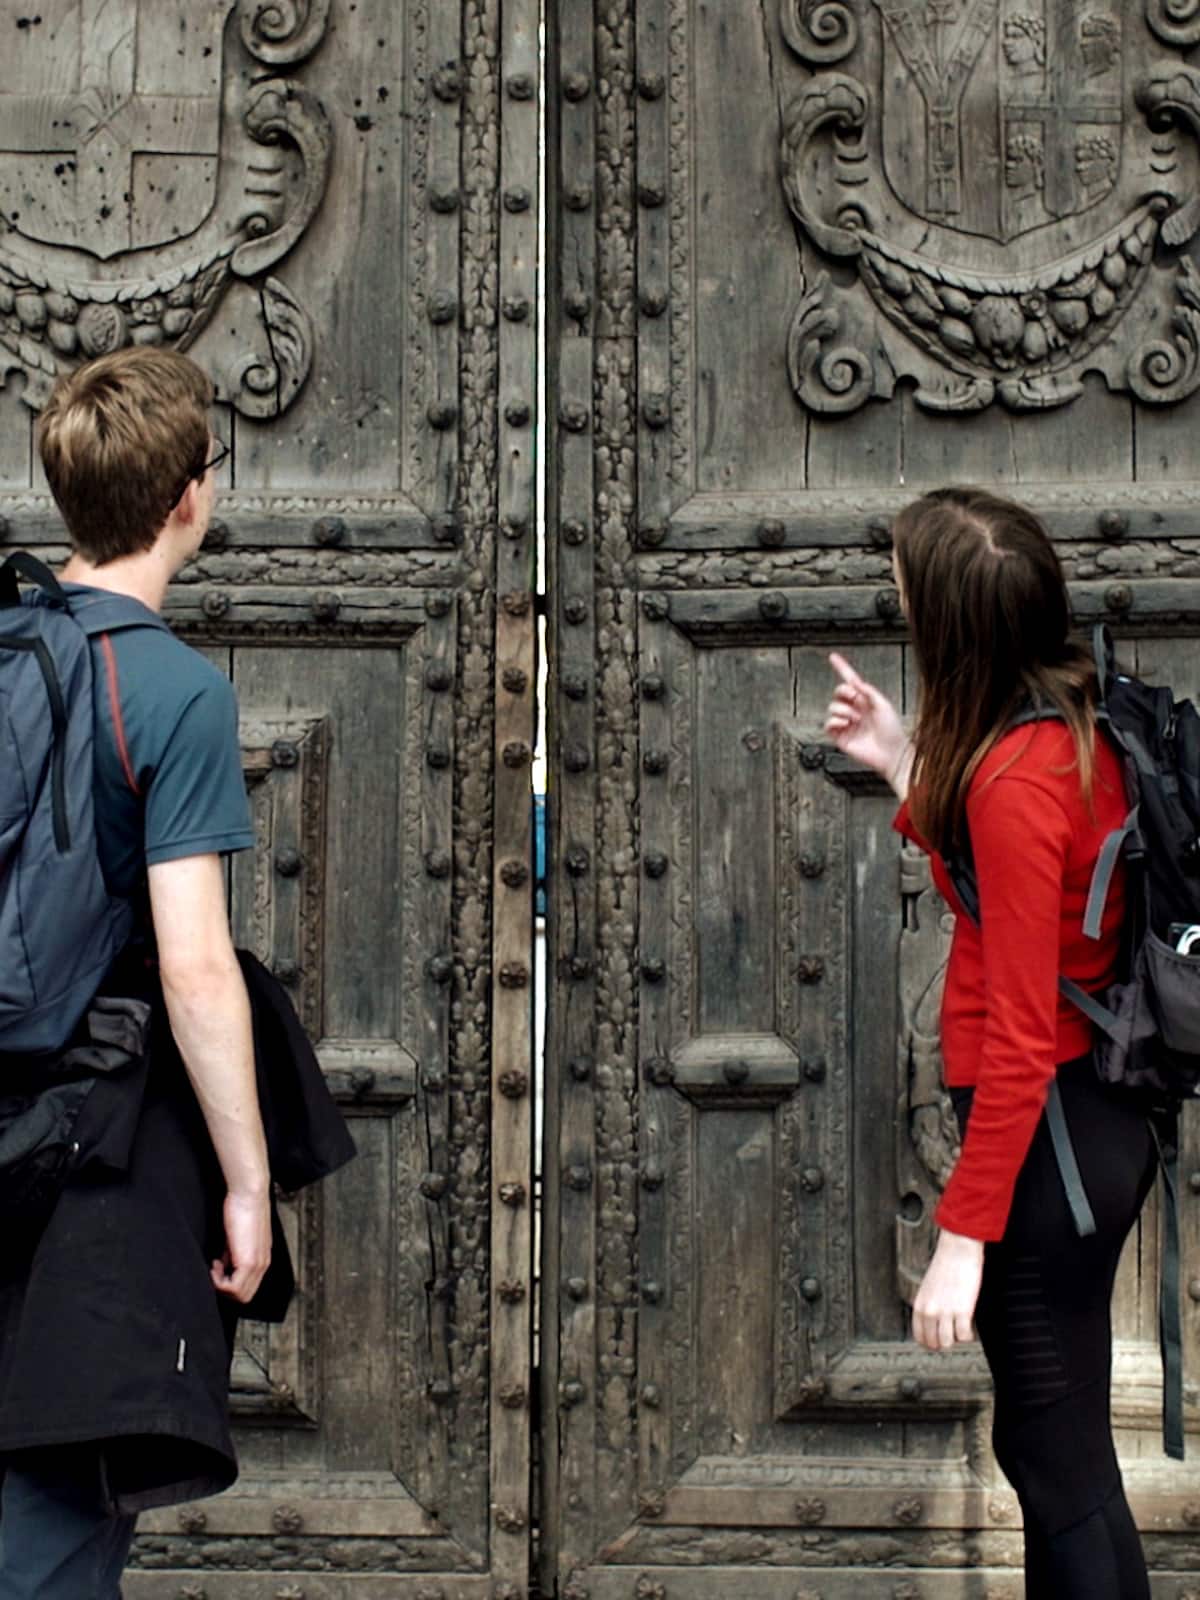 Two people outside a large ancient door